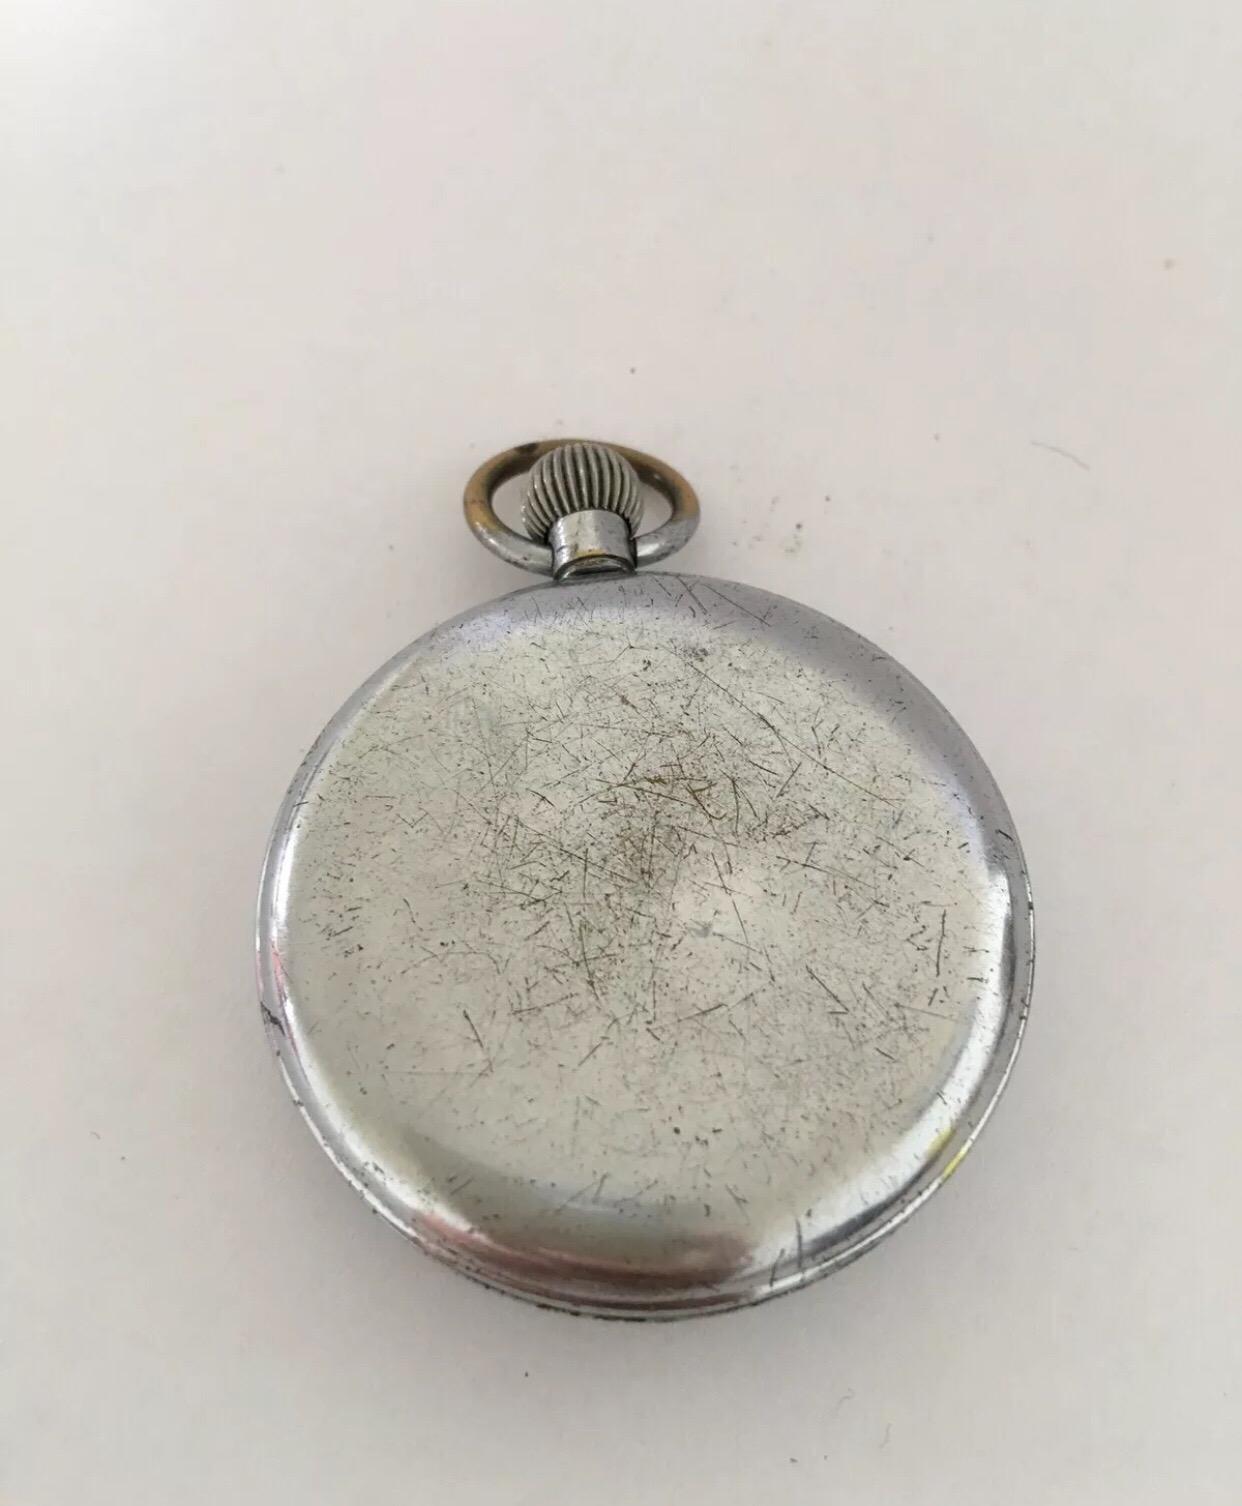 
Antique Swiss Made Pocket Watch.

This standard size watch is working and ticking well. But I cannot guarantee the time accuracy. Its 20 minutes faster in a day. The silver plated watch case is a bit tarnished as it’s wear and tear. Please study